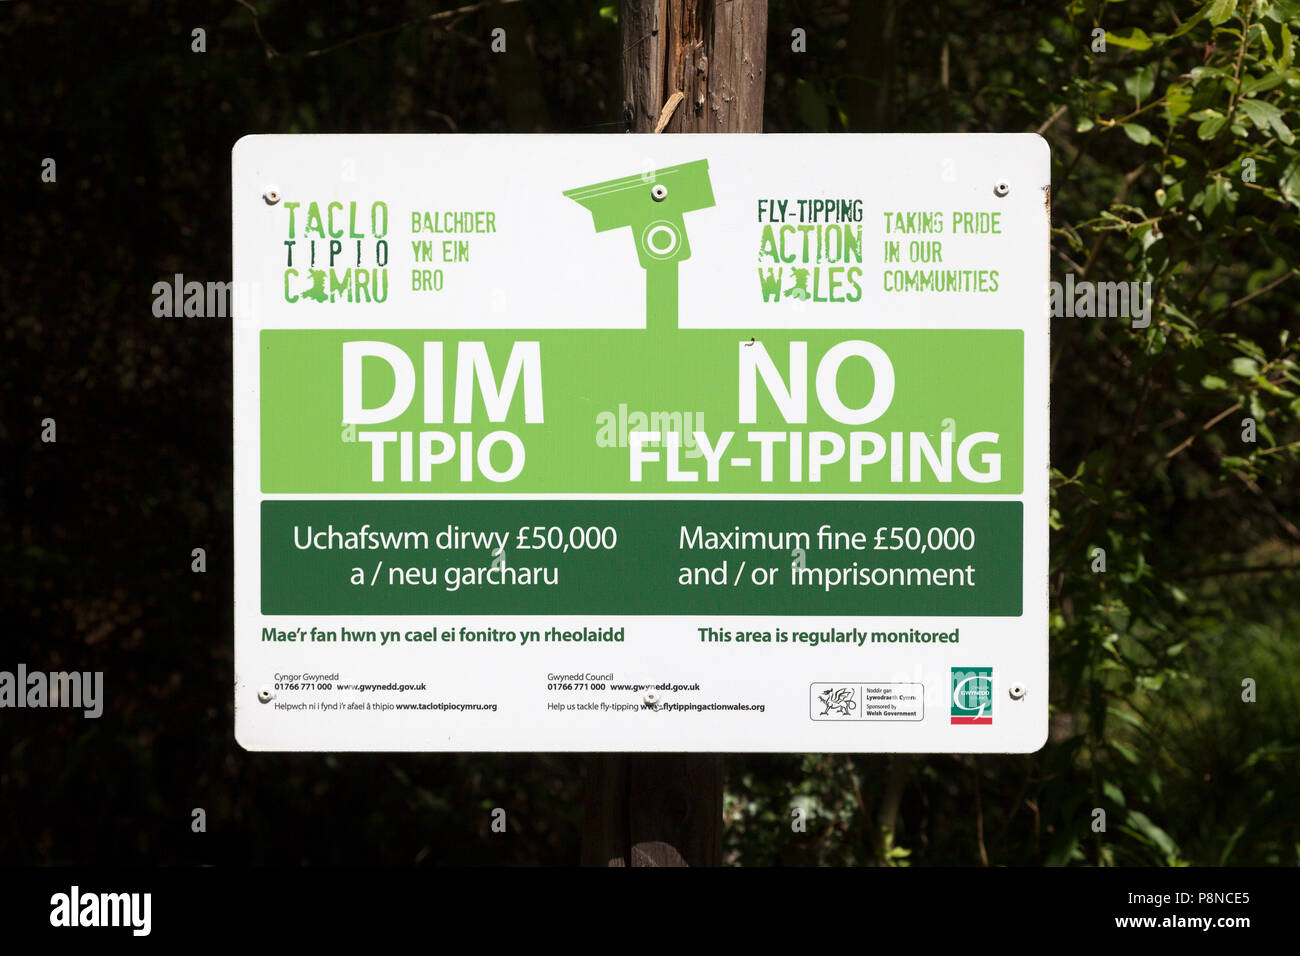 'No Fly-Tipping' attention en gallois et en anglais, Gwynedd, Pays de Galles, Rhyd Banque D'Images